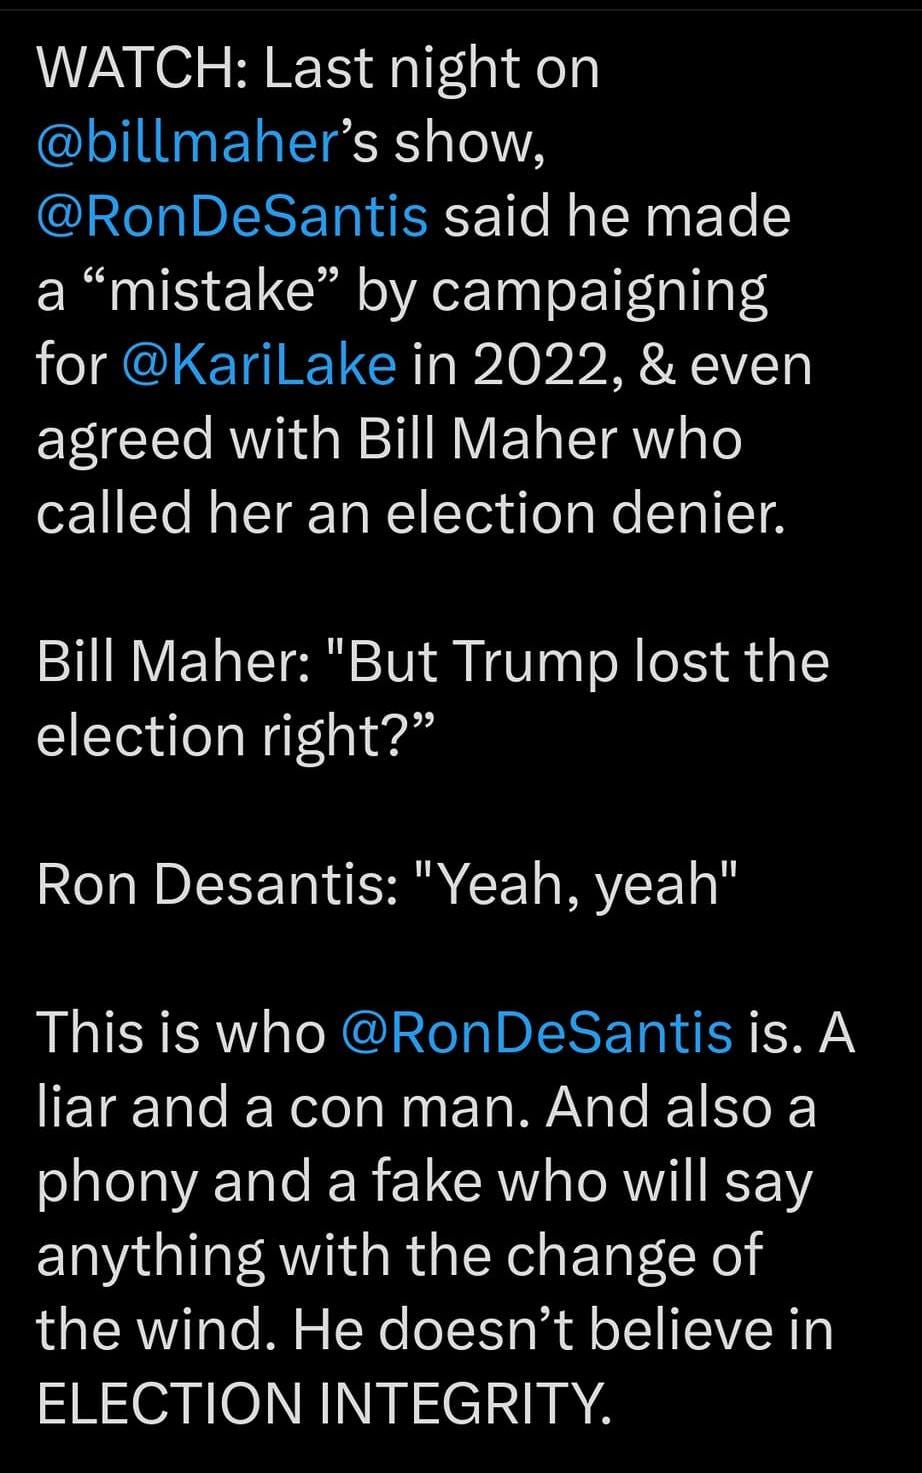 May be a graphic of text that says '12:17 MM 5G. 21%_ Post WATCH: Last night on @billmaher's show, RonDeSantis said he made "mistake" by campaigning for @KariLake in 2022, & even agreed with Bill Maher who called her an election denier. Bill Maher: "But Trump lost the election right?" Ron Desantis: "Yeah, yeah" This is who @RonDeSantis is. A liar and a con man. And also a phony and a fake who will say anything with the change of the wind. He doesn't believe in ELECTION INTEGRITY. Post your rep'